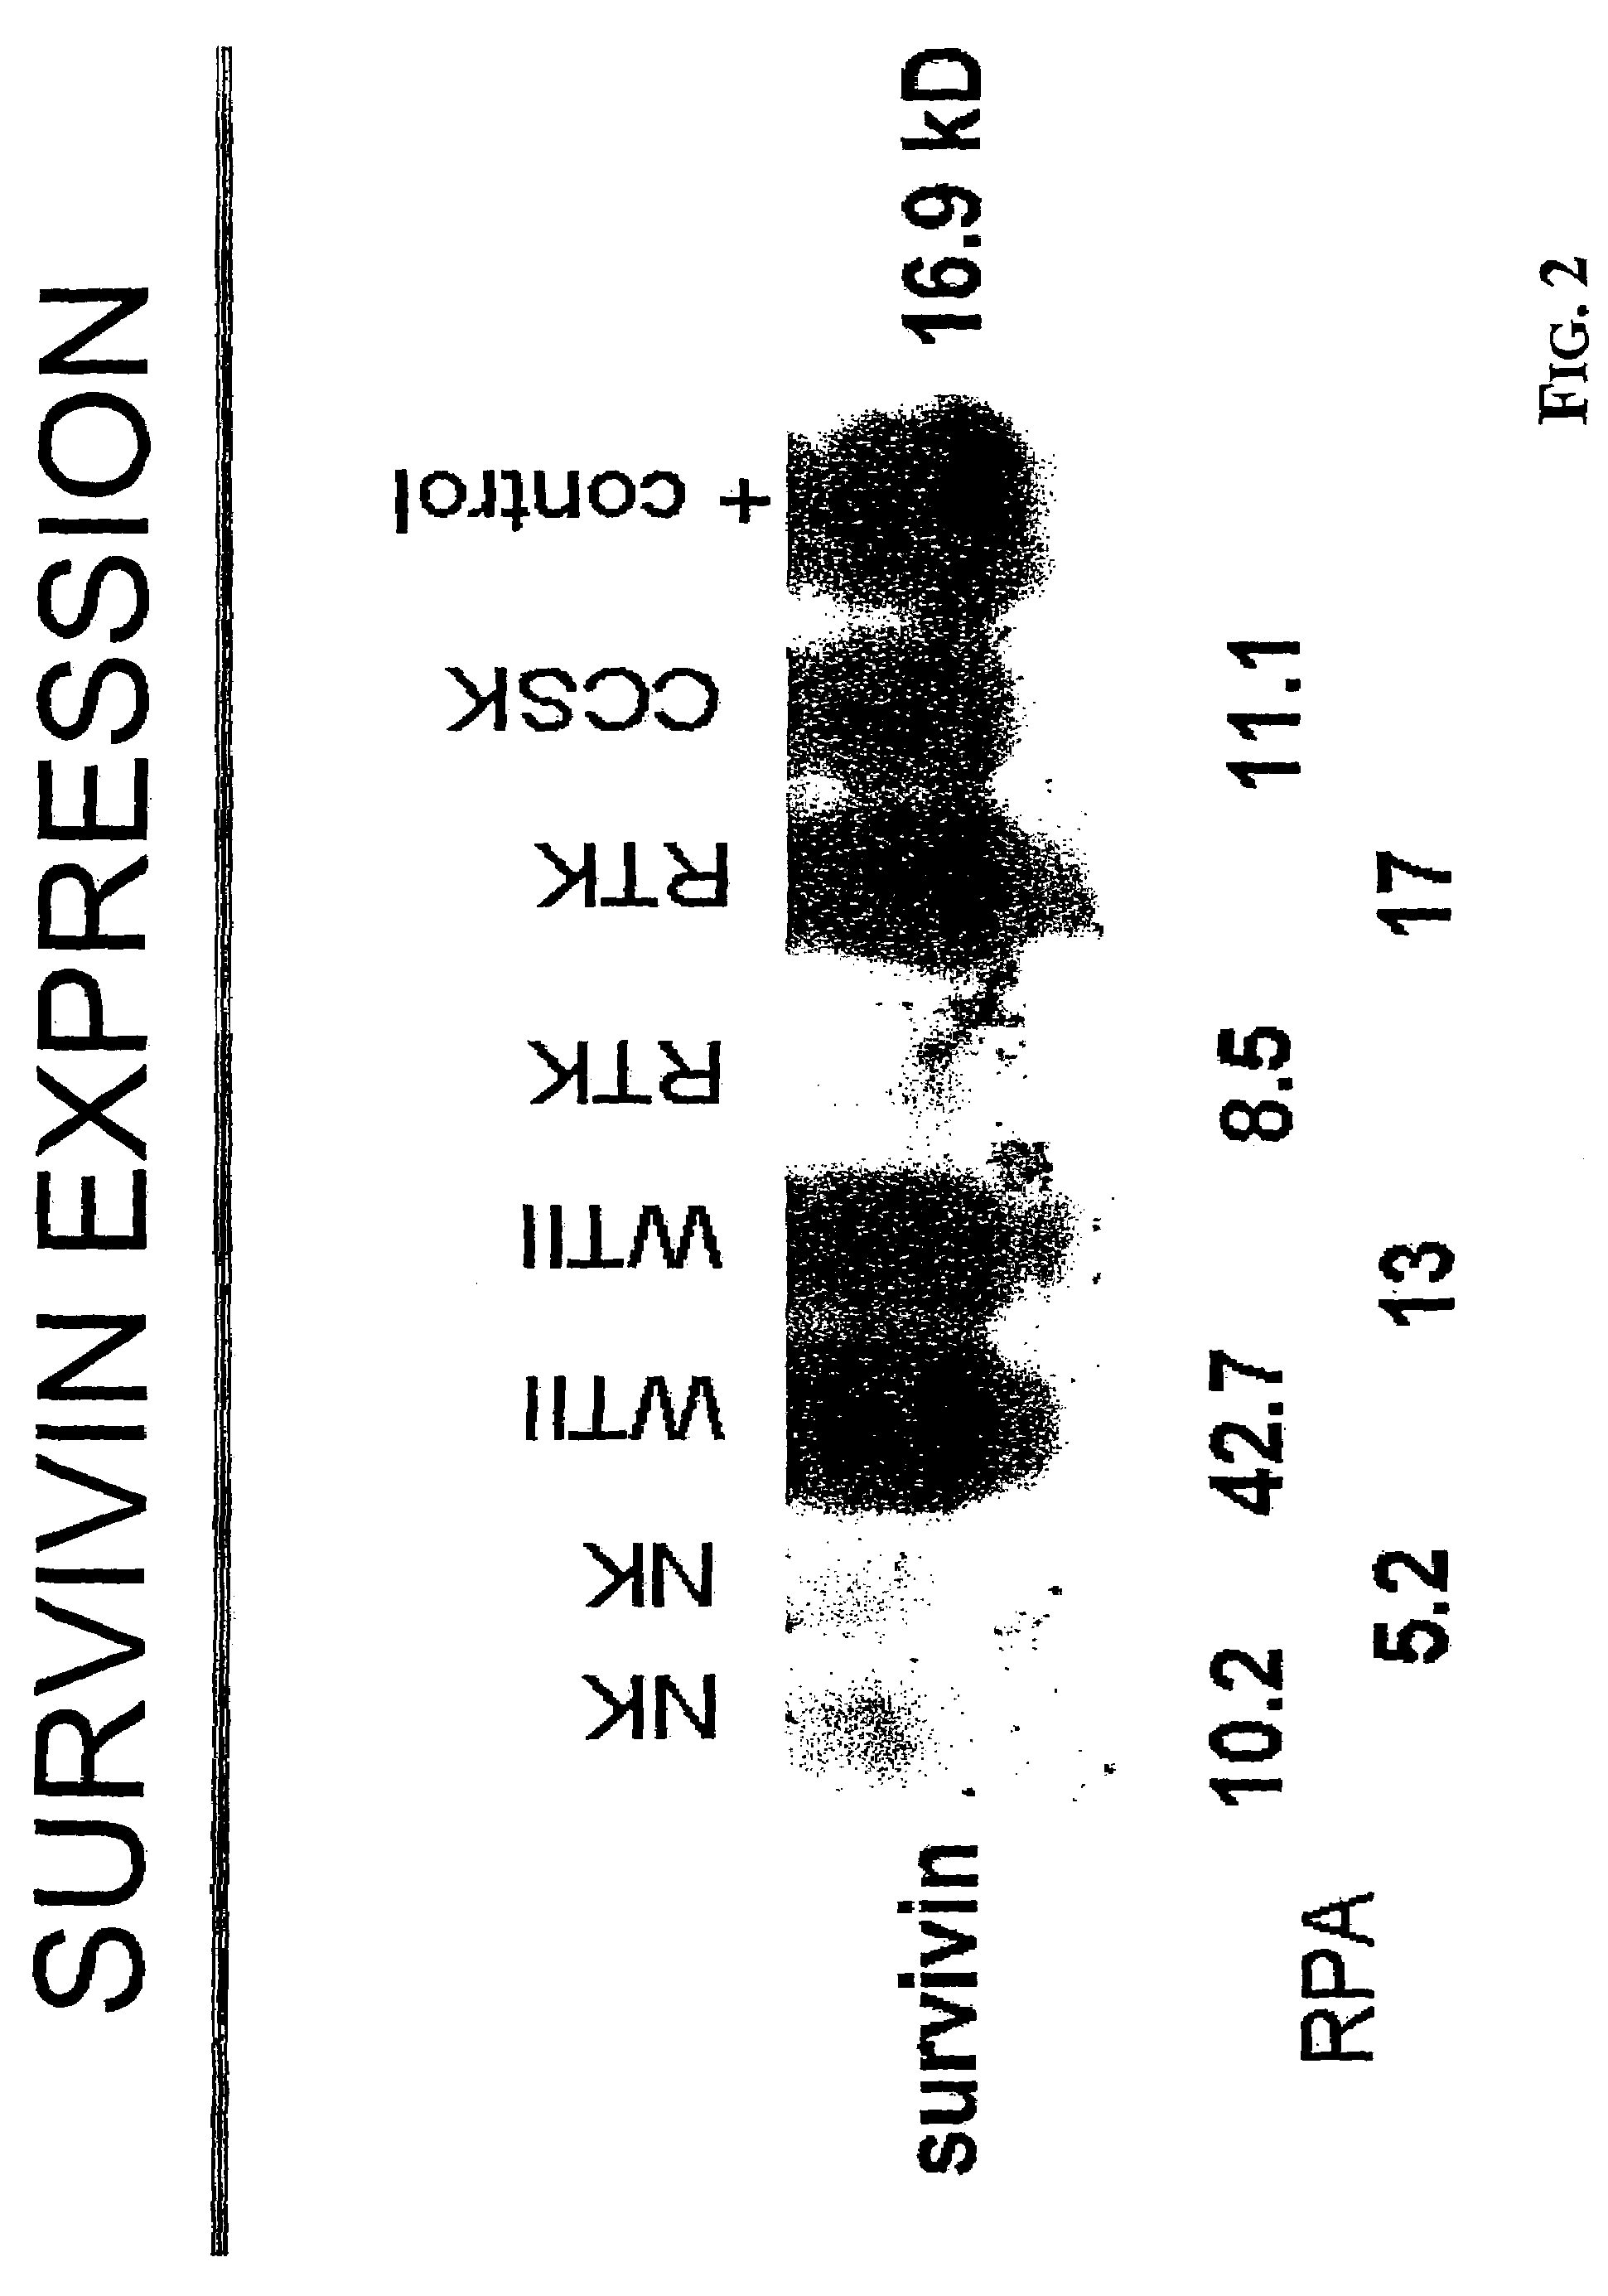 Method for predicting tumor recurrence